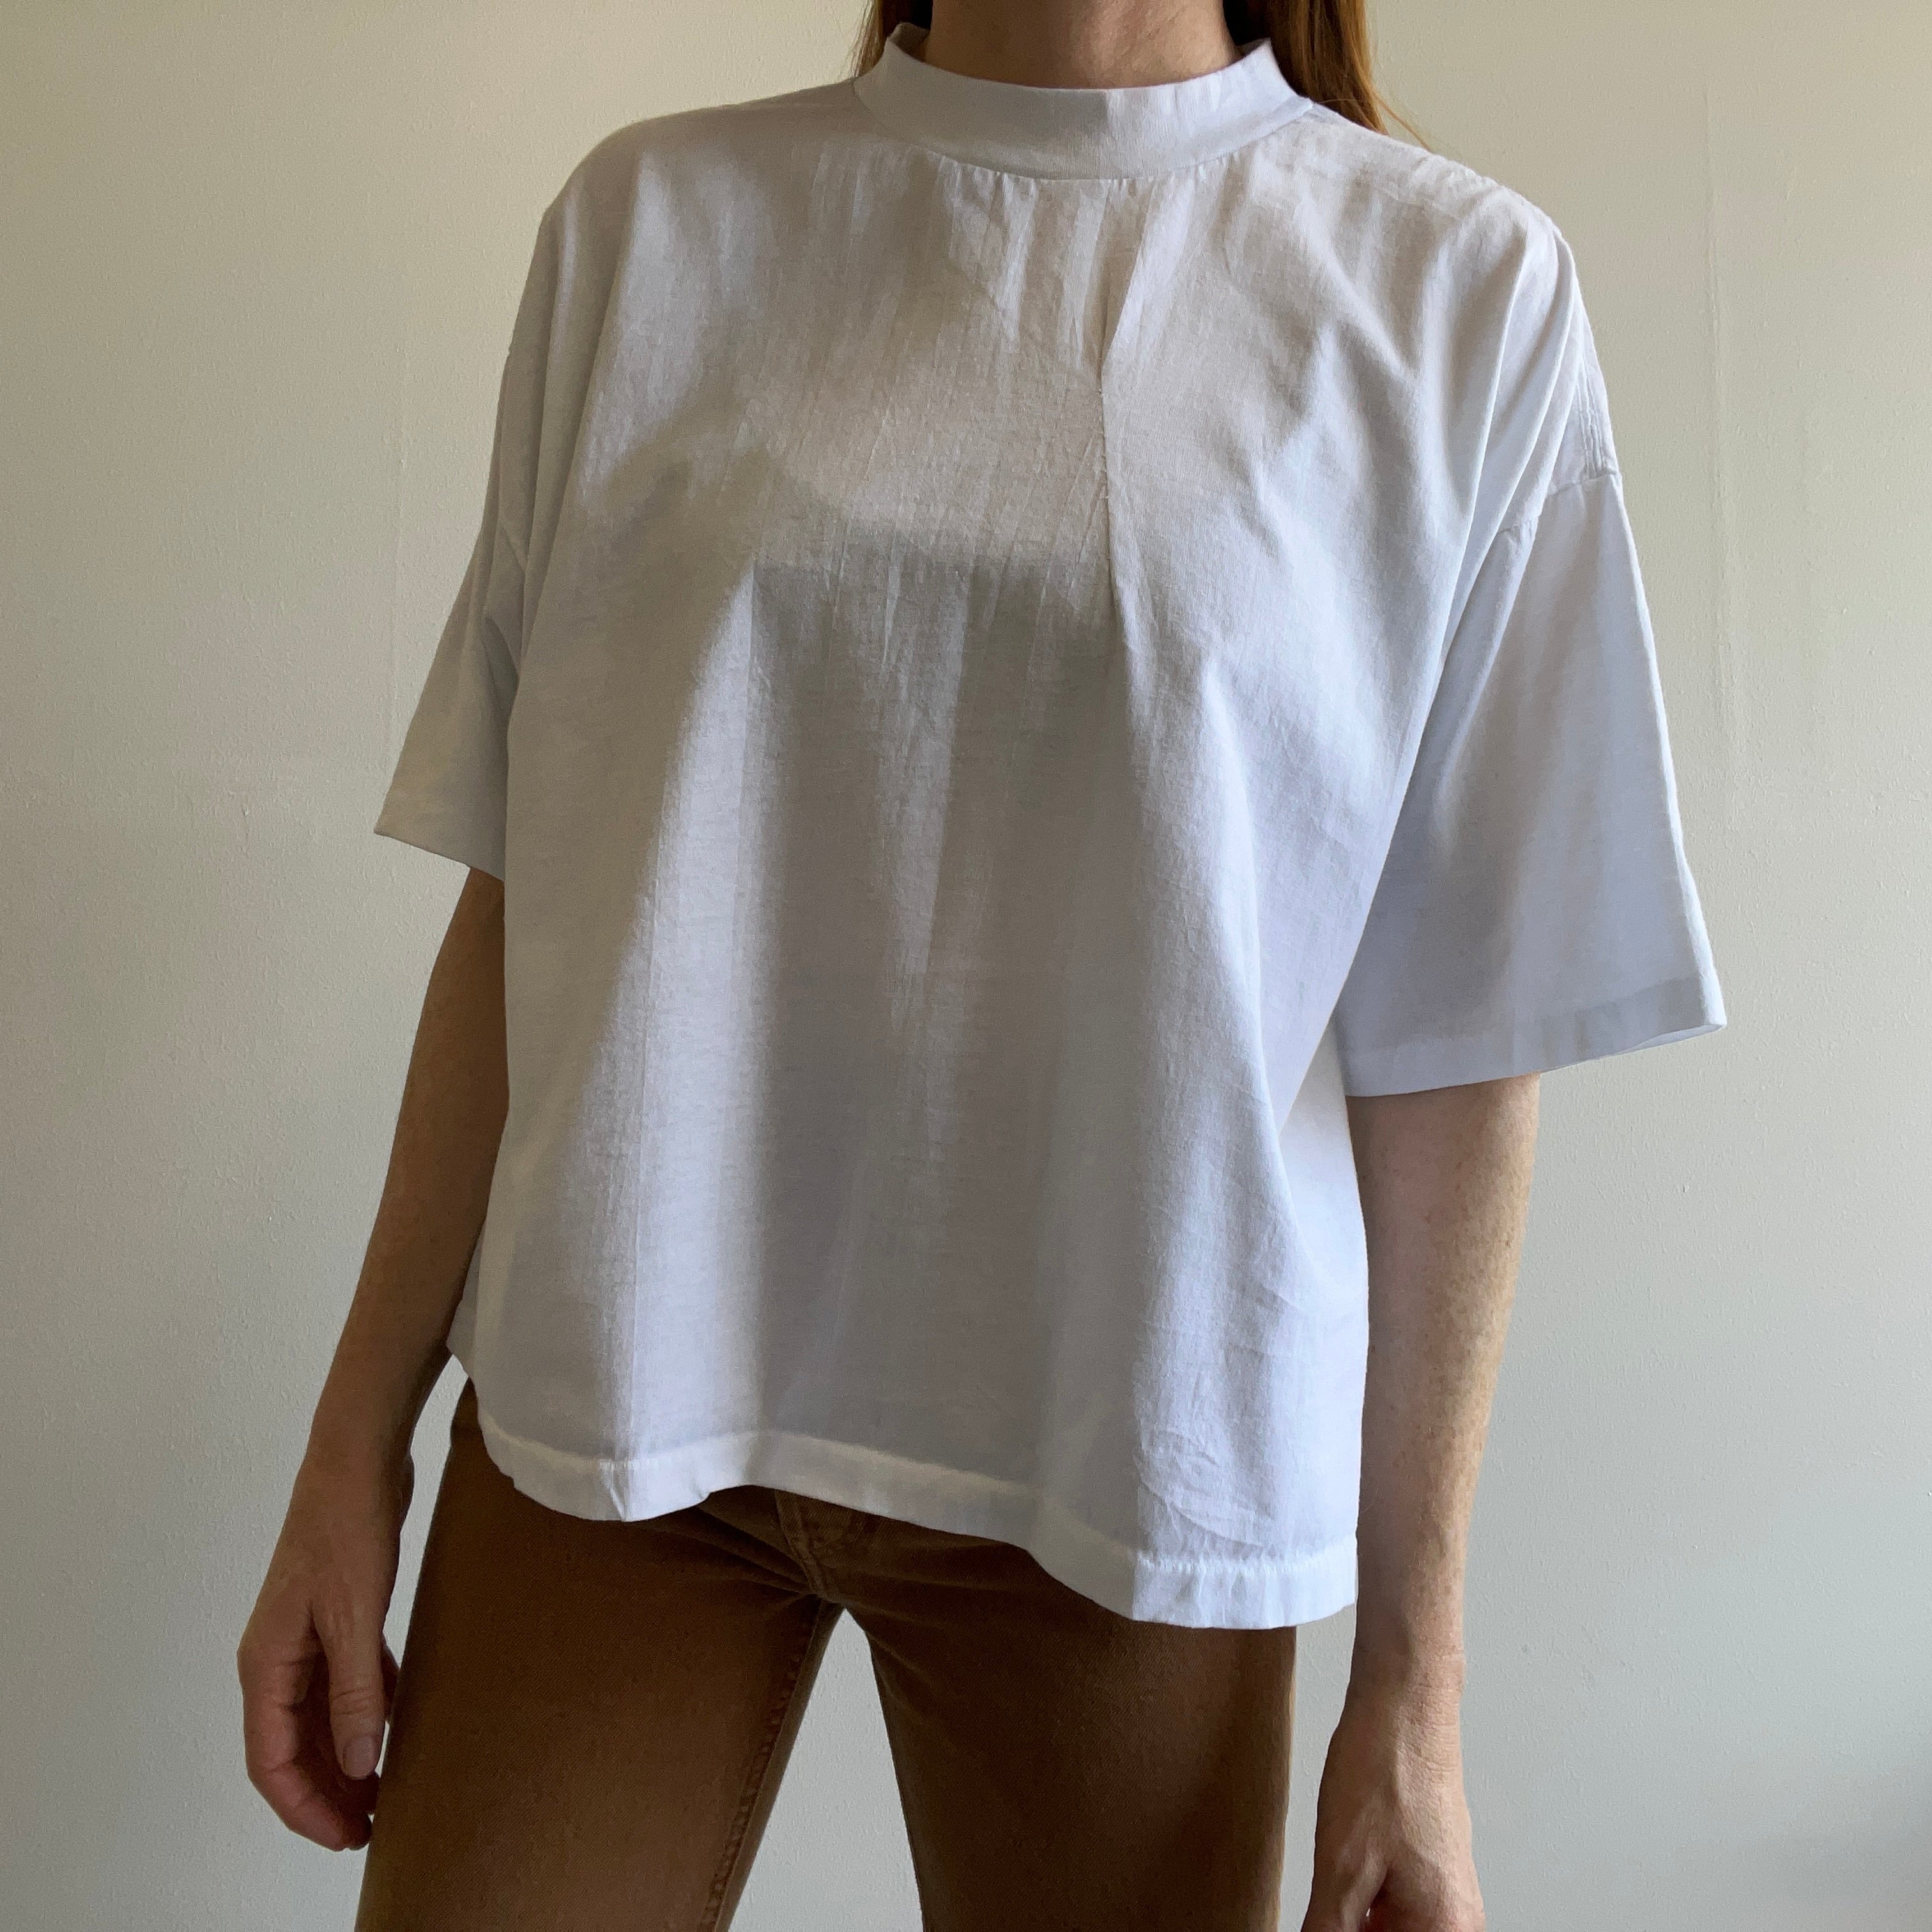 GG 1990s White Mock Neck Boxy Crop with Mending - Unusual and CooL!